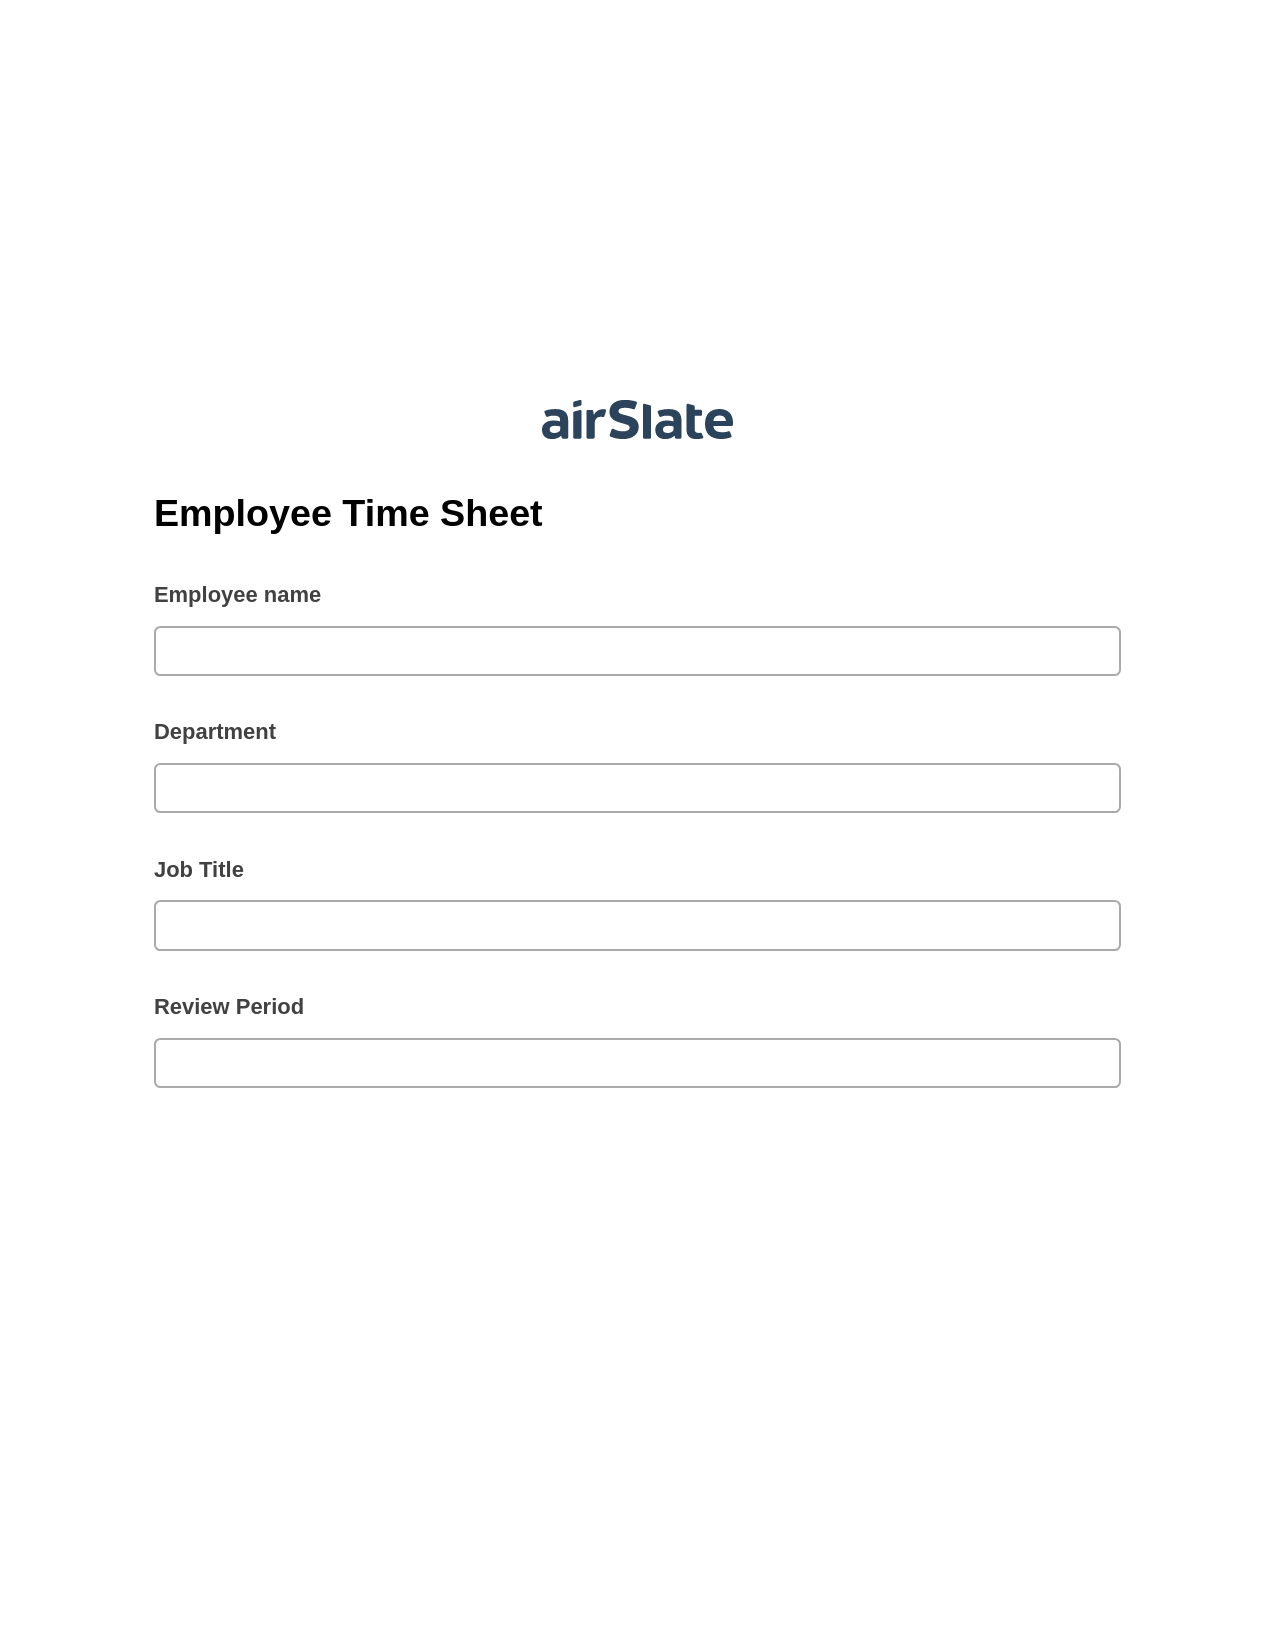 Multirole Employee Time Sheet Pre-fill Document Bot, Create Salesforce Records Bot, Export to Smartsheet